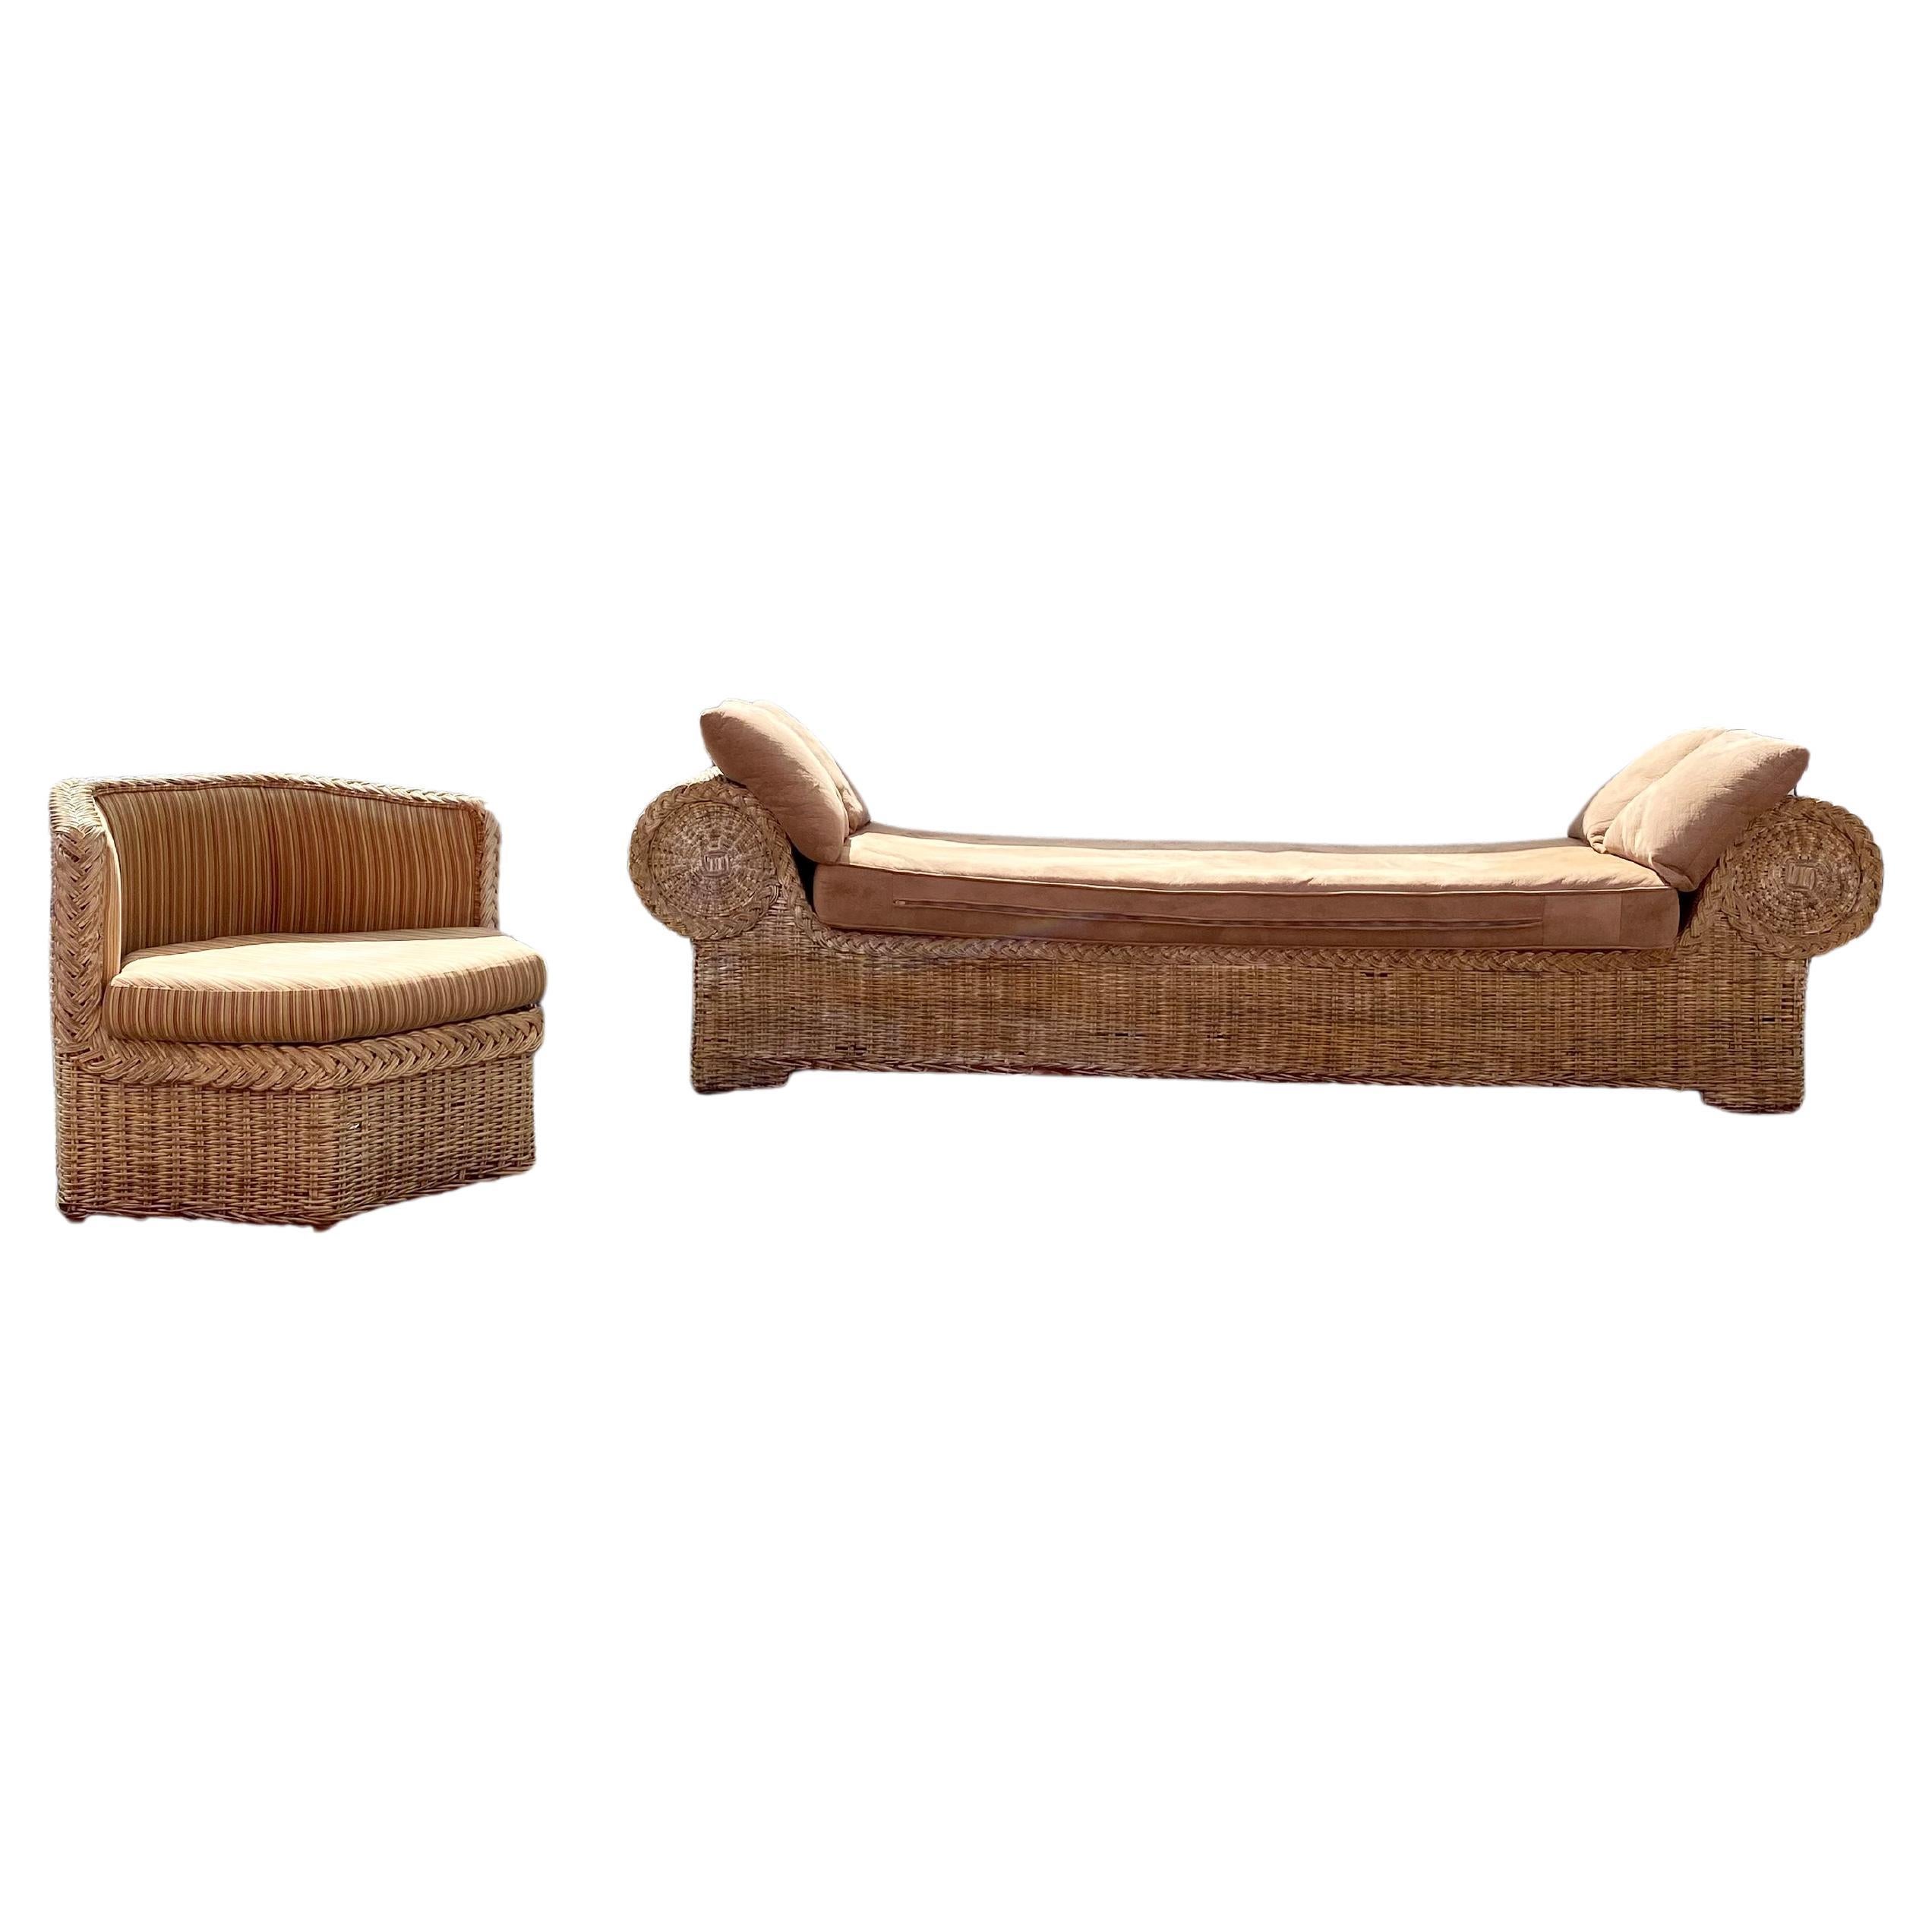 1970s Monumental Rattan Daybed and Chair, Set of 2 For Sale